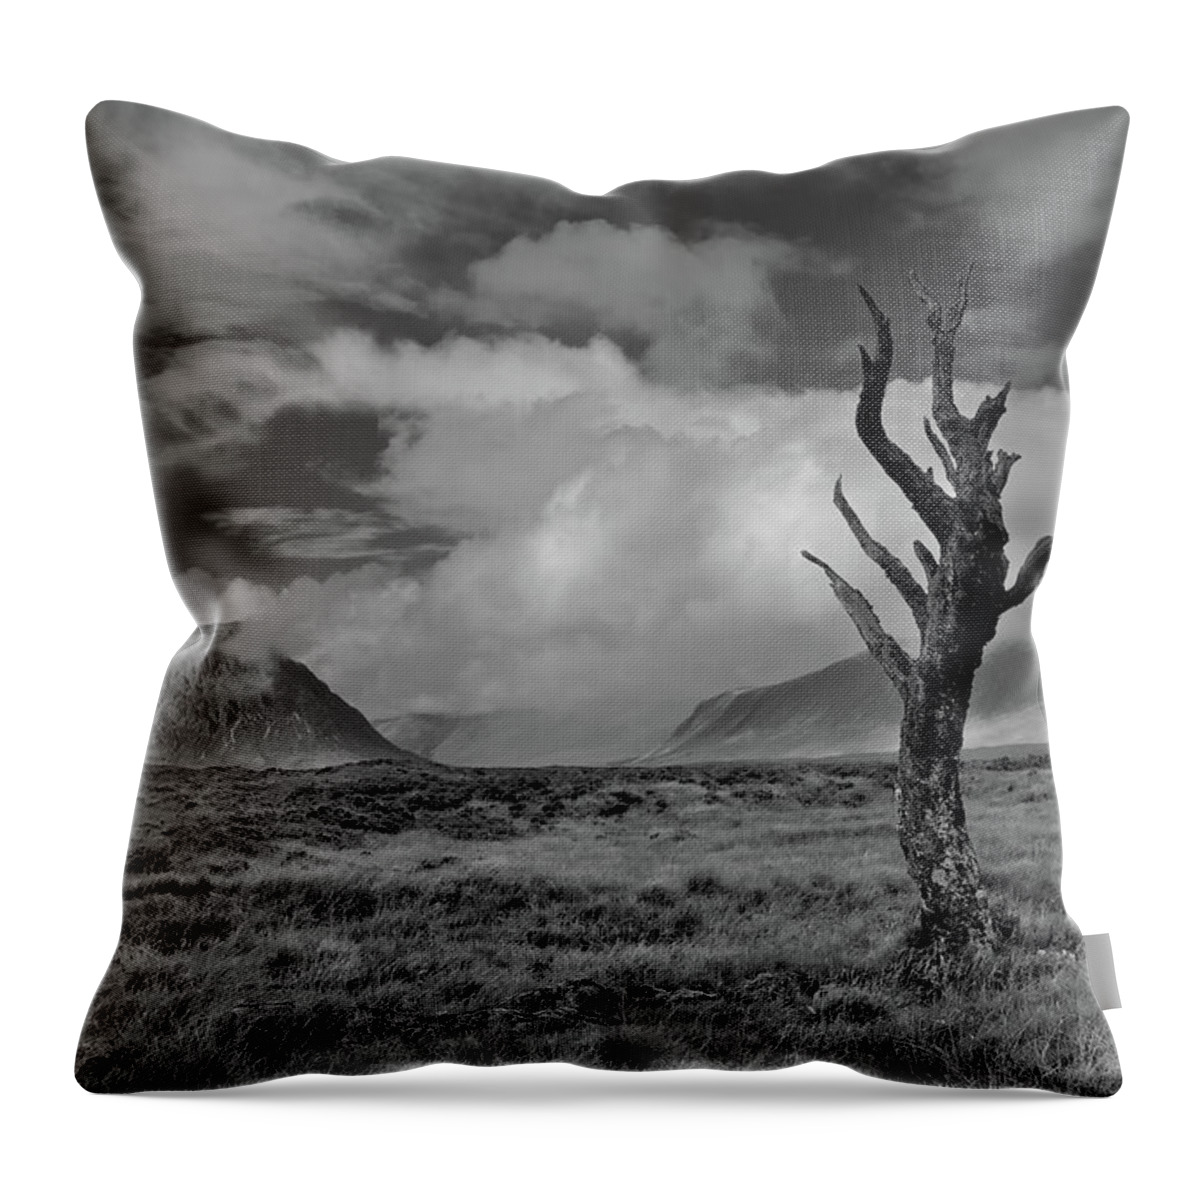 The End Throw Pillow featuring the photograph Dead Tree by Rabmcbridephotography